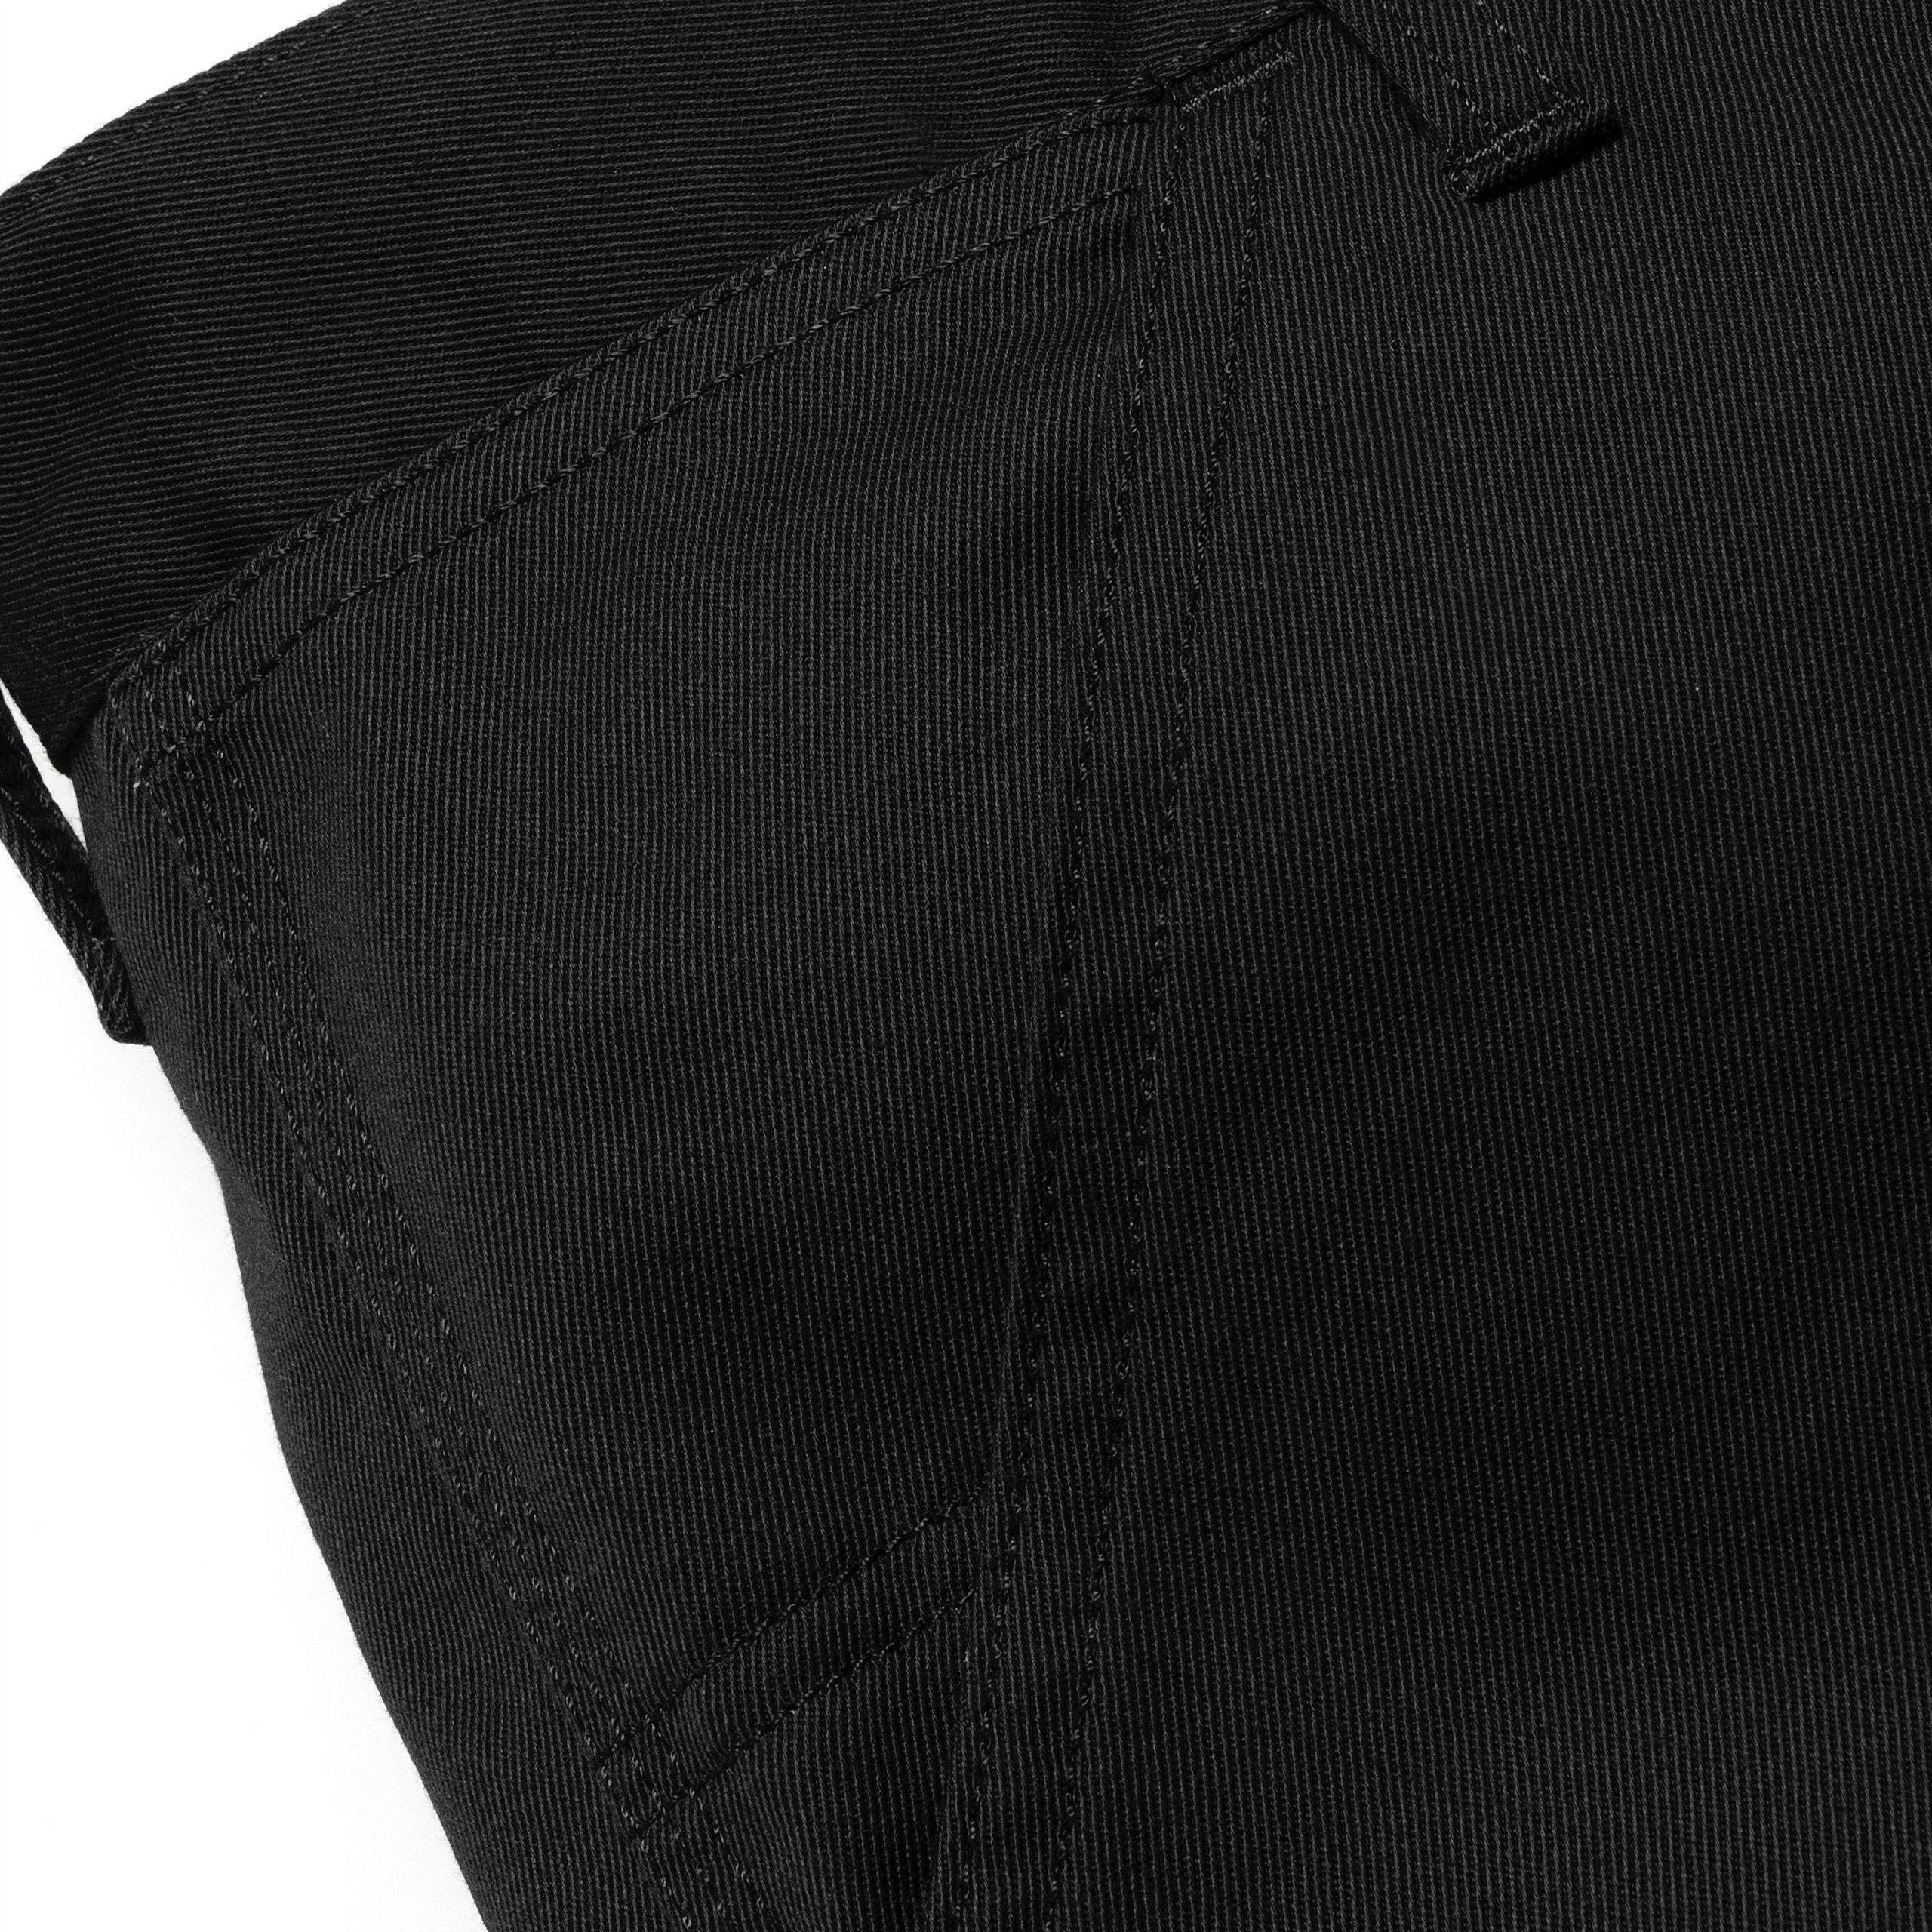 Carhartt Wip Simple Pant Polyester/cotton Denison Twill, 8.8 Oz Black Rinsed Uomo - 6